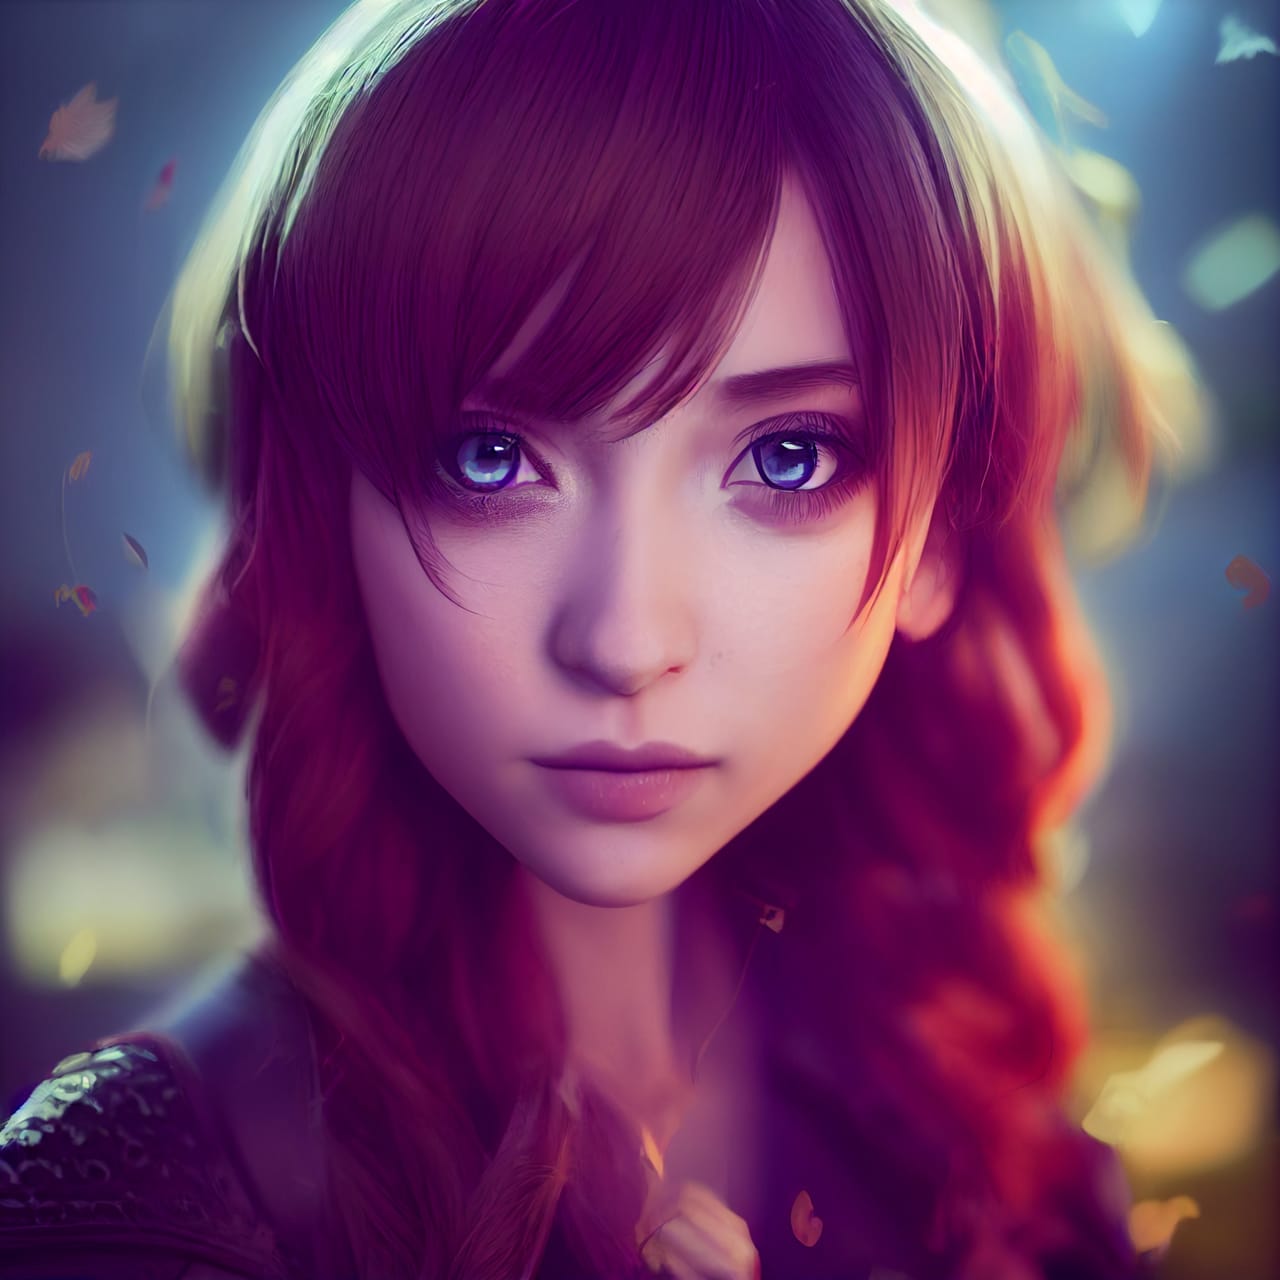 Related image beautiful ginger woman redhaired girl portrait 3d rendering